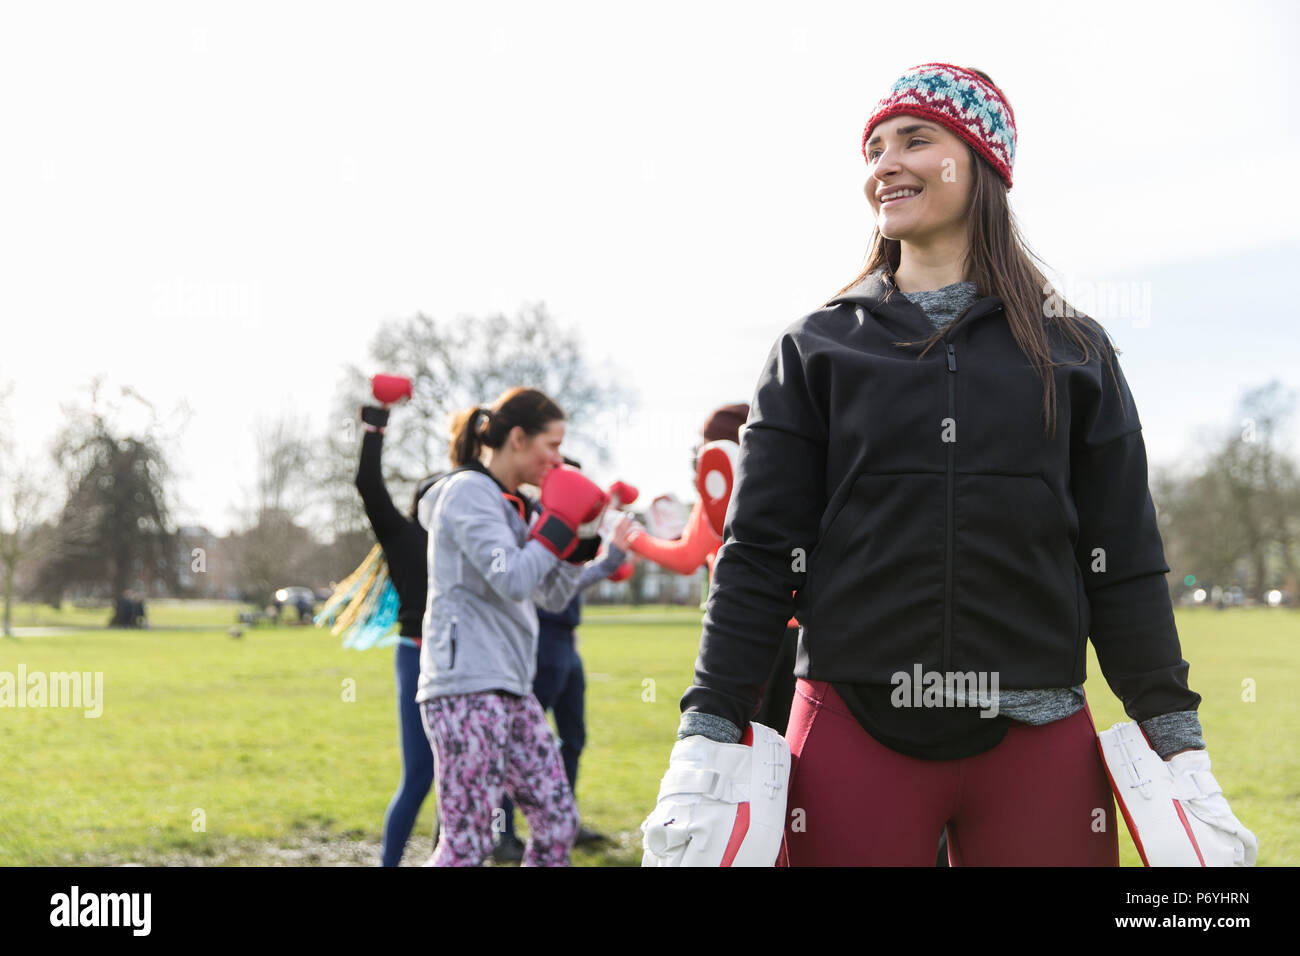 Smiling, confident woman boxing in park Stock Photo